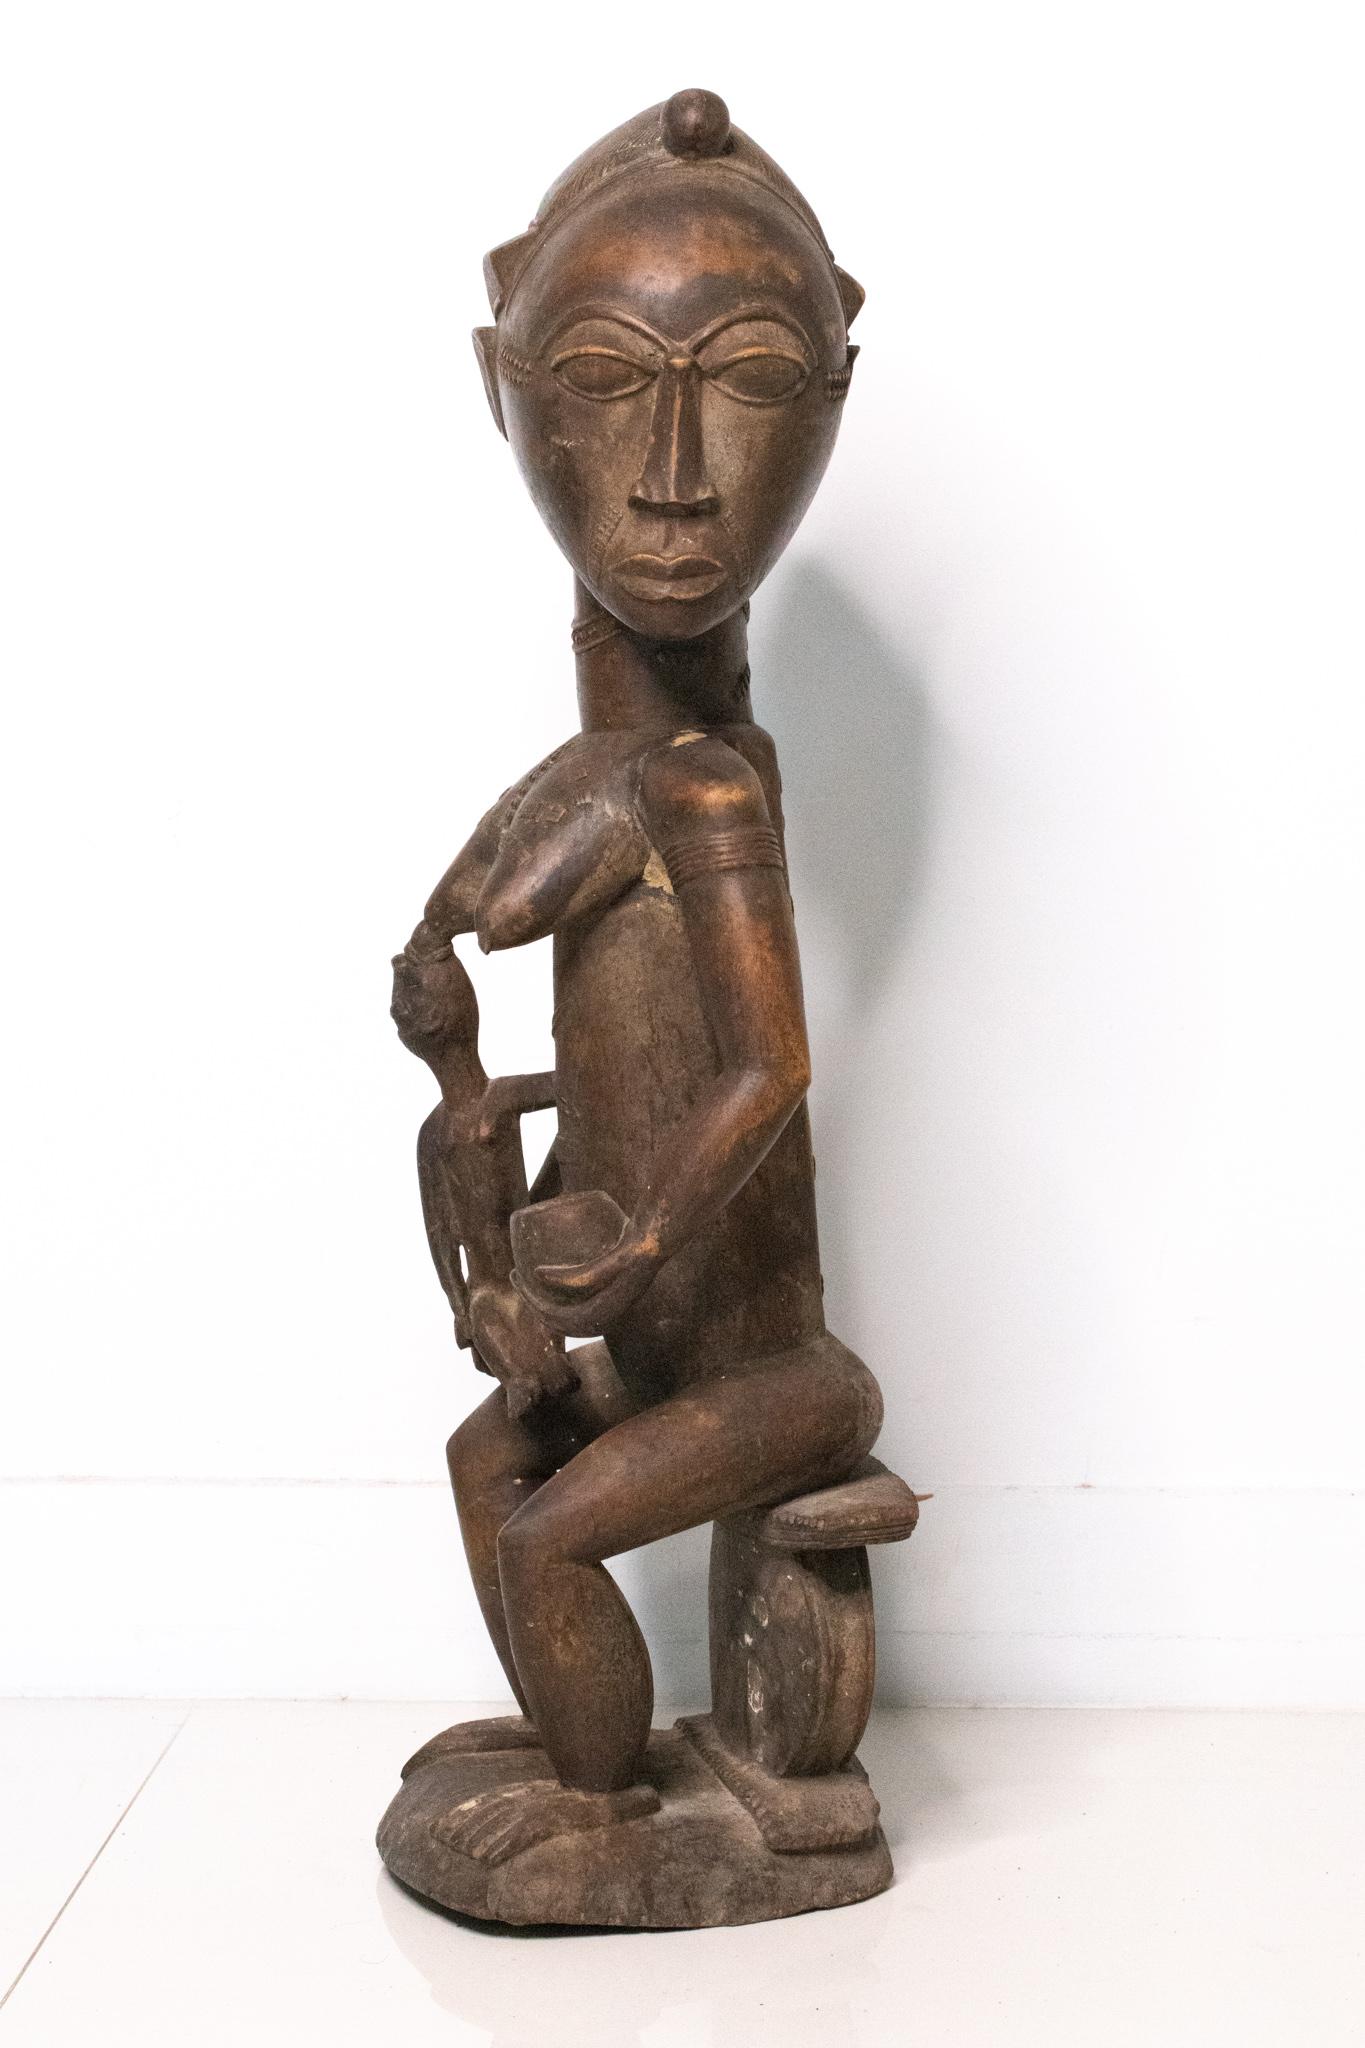 Maternity sculpture figure from the Baoule people

Magnificent large sculpture of a seated maternity facing to the left, holding with the left hand an offering vase and breastfeeding a child. This tall sculpture was made in the early 20th century,